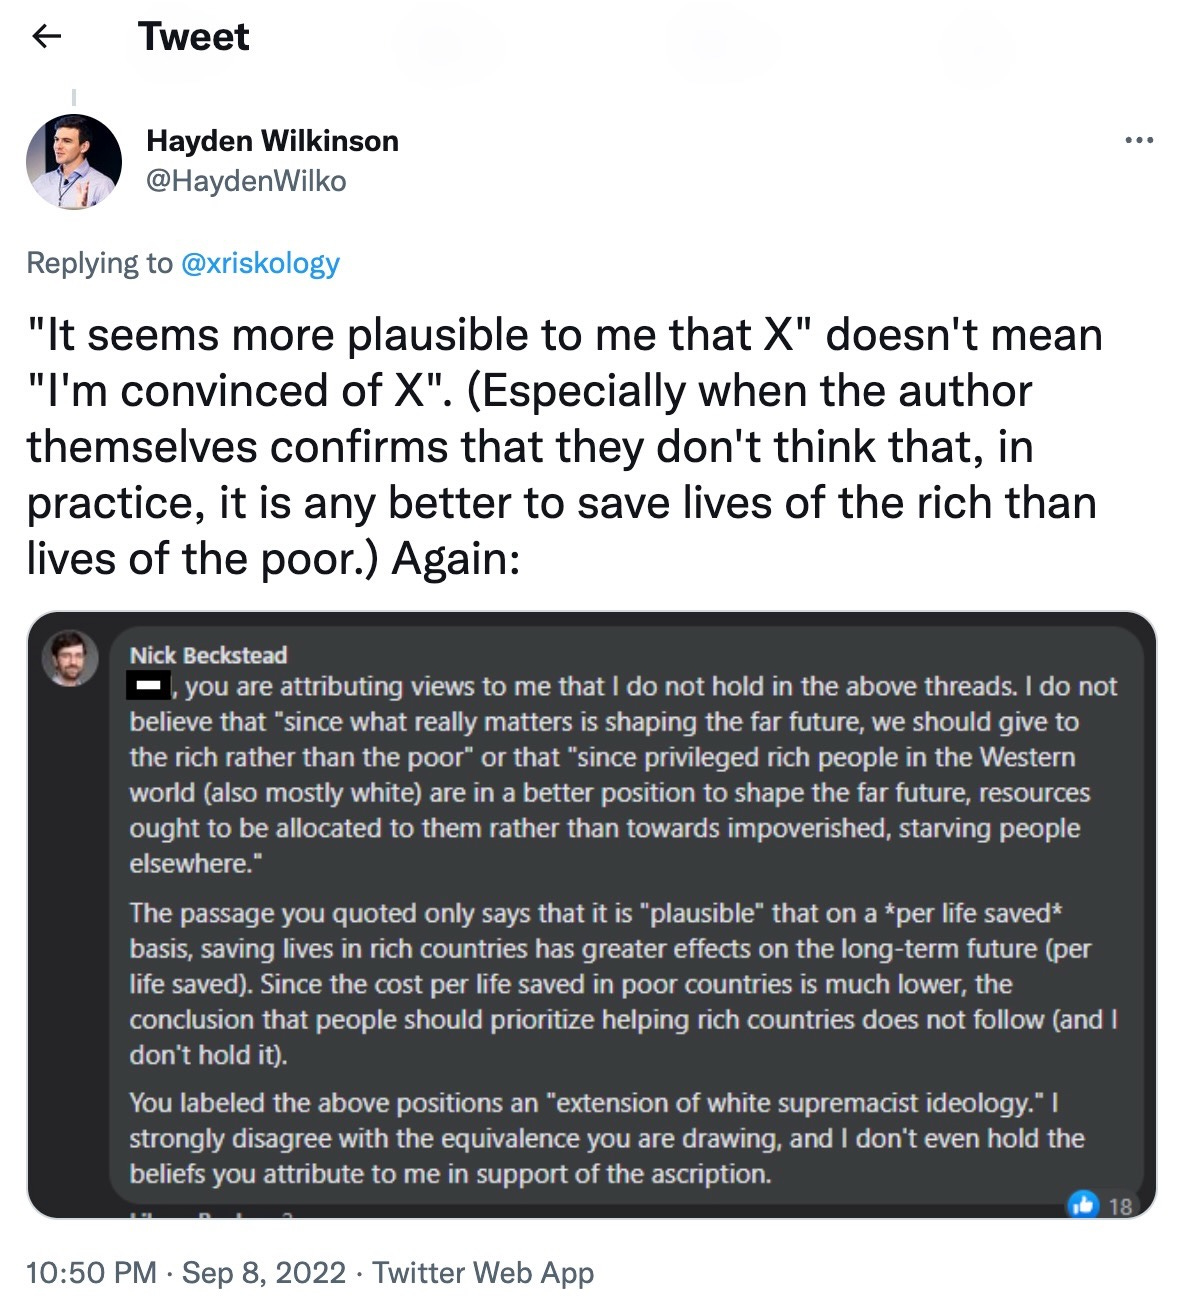 Hayden Wilkinson: "It seems more plausible to me that X" doesn't mean "I'm convinced of X". (Especially when the author themselves confirms that they don't think that, in practice, it is any better to save lives of the rich than lives of the poor.) Again: Nick Beckstead: Phil, you are attributing views to me that I do not hold in the above threads. I do not believe that "since what really matters is shaping the far future, we should give to the rich rather than the poor" or that "since privileged rich people in the Western world (also mostly white) are in a better position to shape the far future, resources ought to be allocated to them rather than towards impoverished, starving people elsewhere." The passage you quoted only says that it is "plausible' that on a per life saved basis, saving lives in rich countries has greater effects on the long-term future (per life saved). Since the cost per life saved in poor countries is much lower, the conclusion that people should prioritize helping rich countries does not follow (and don't hold it). You labeled the above positions an "extension of white supremacist ideology.' I strongly disagree with the equivalence you are drawing, and I don't even hold the beliefs you attribute to me in support of the ascription.